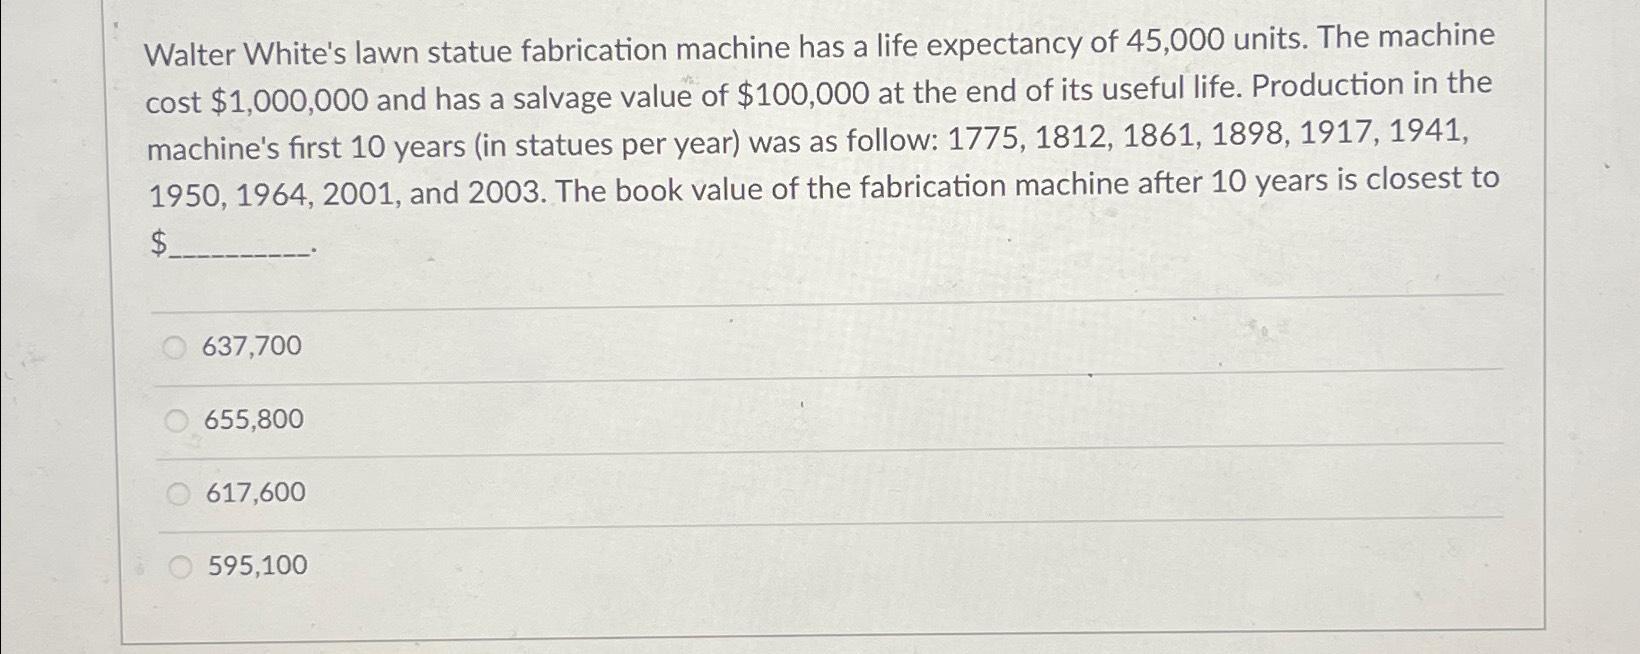 Walter White's lawn statue fabrication machine has a life expectancy of 45,000 units. The machine cost